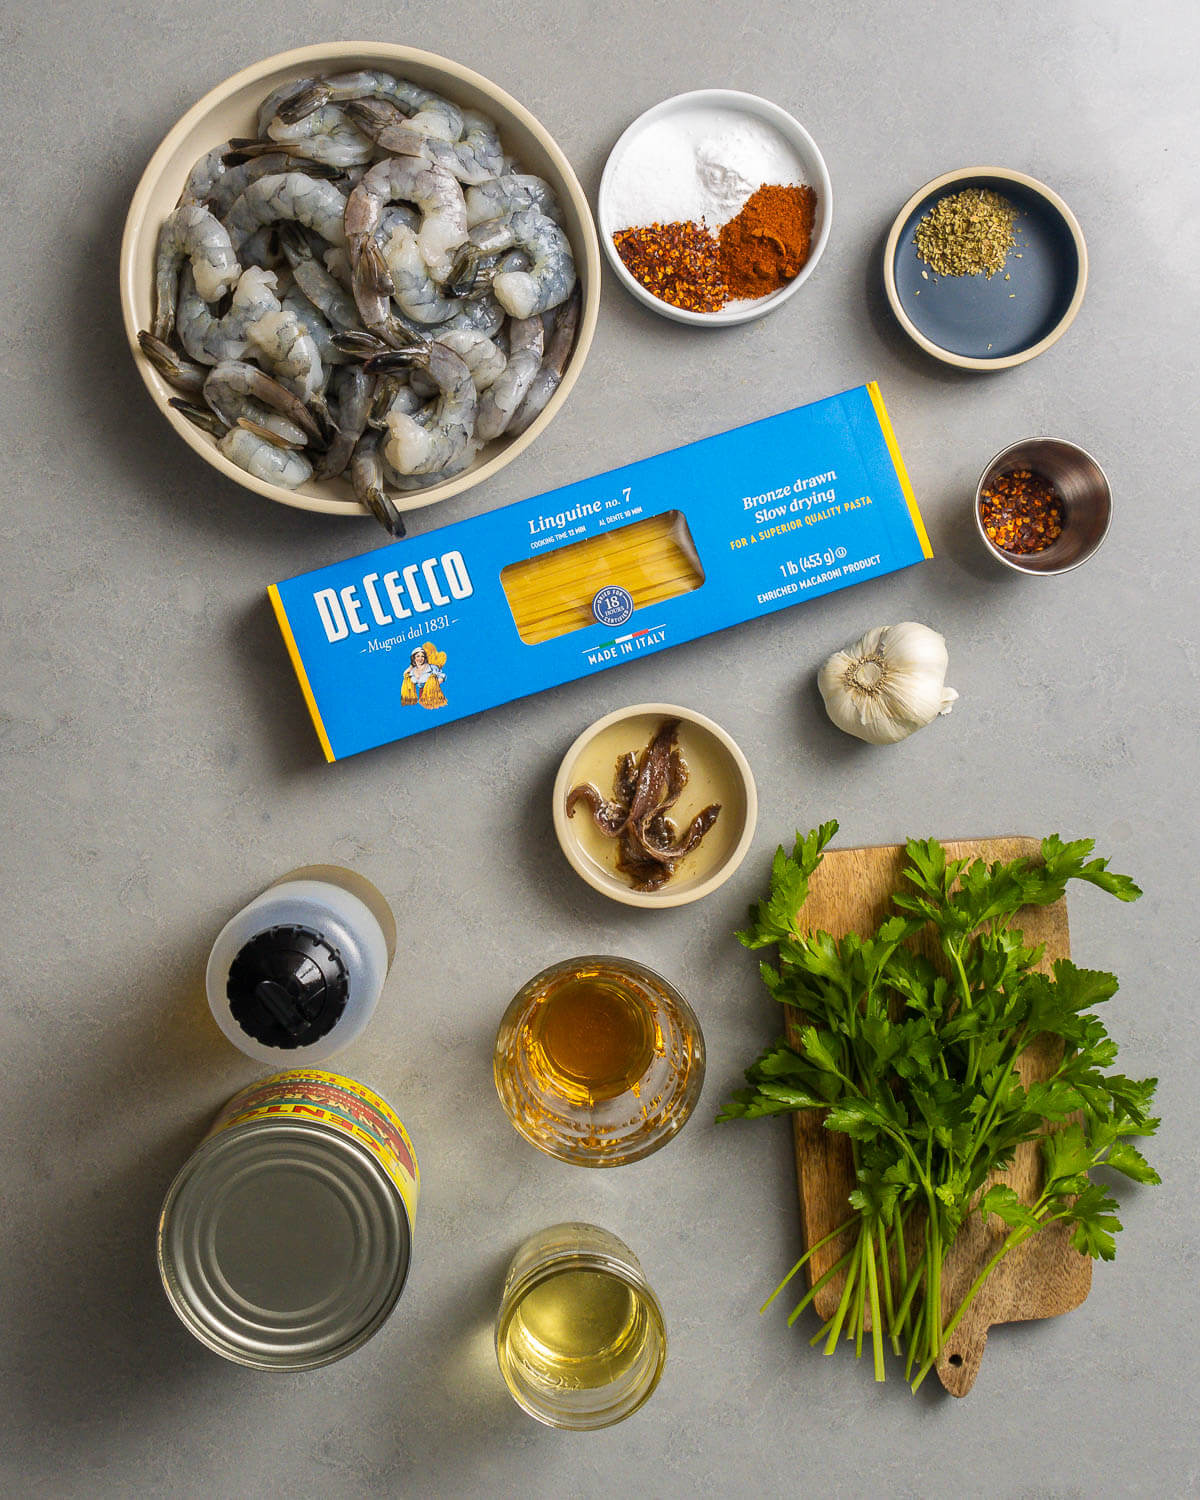 Ingredients shown: shrimp, spices, linguine, hot red pepper flakes, anchovies, garlic, olive oil, plum tomatoes, white wine, brandy, and parsley.